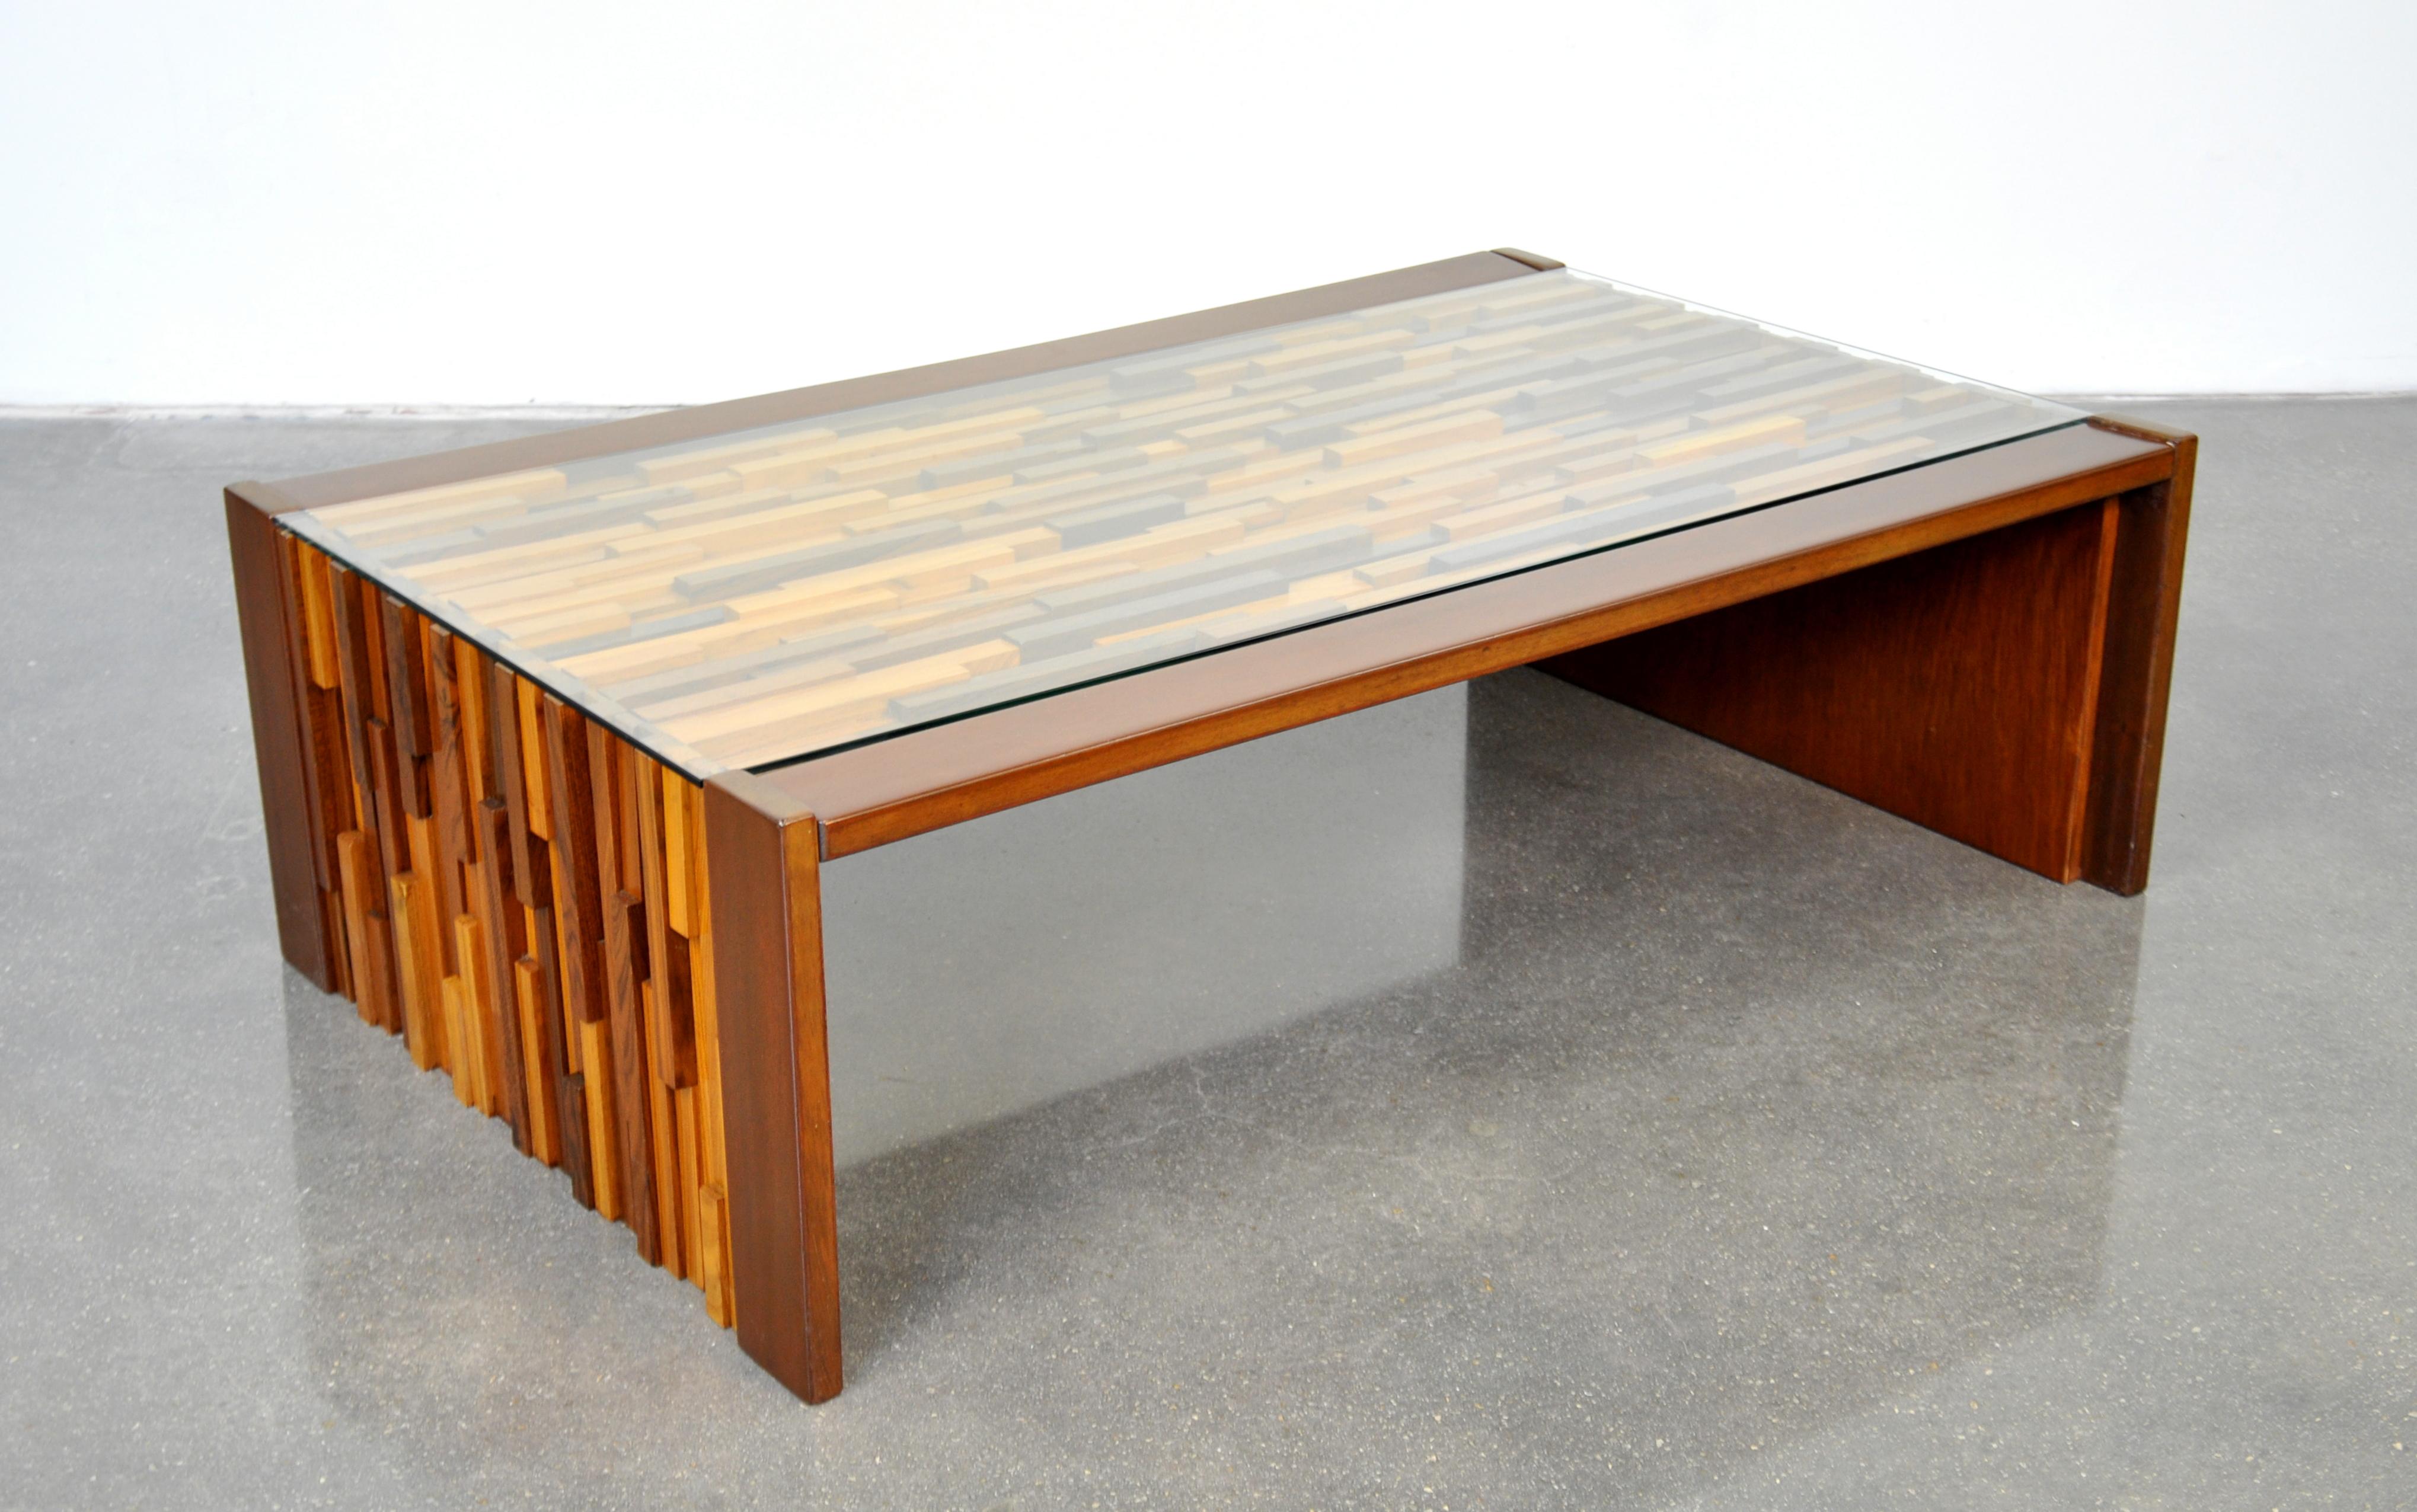 A striking vintage Mid-Century Modern Brazilian rosewood, jacaranda, teak and mahogany cocktail table designed by Percival Lafer, dating from the 1960s. The rectangular table features a sculptural relief of different exotic tropical hardwoods and a